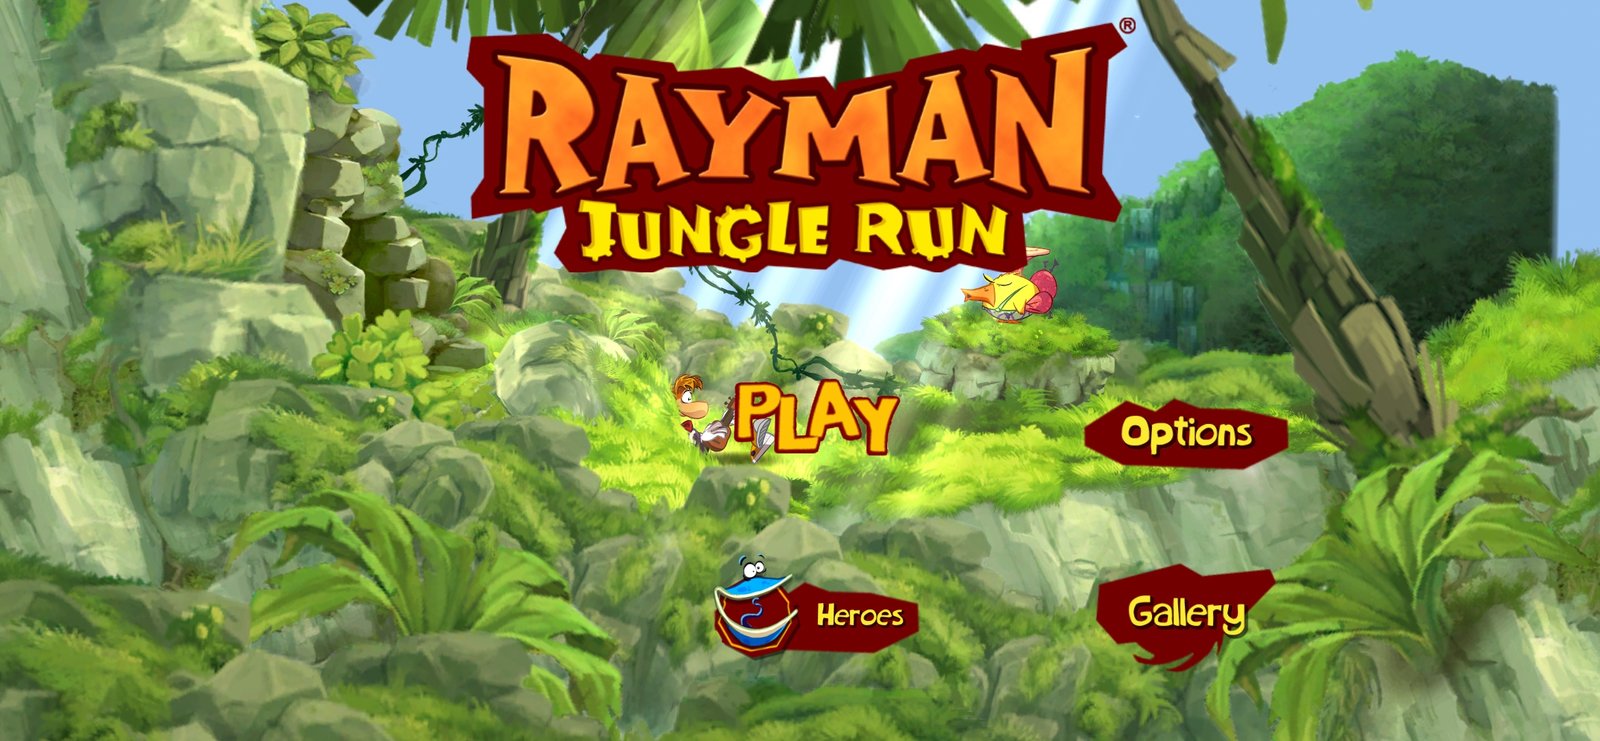 Rayman Jungle Run APK + Mod 2.4.3 - Download Free for Android